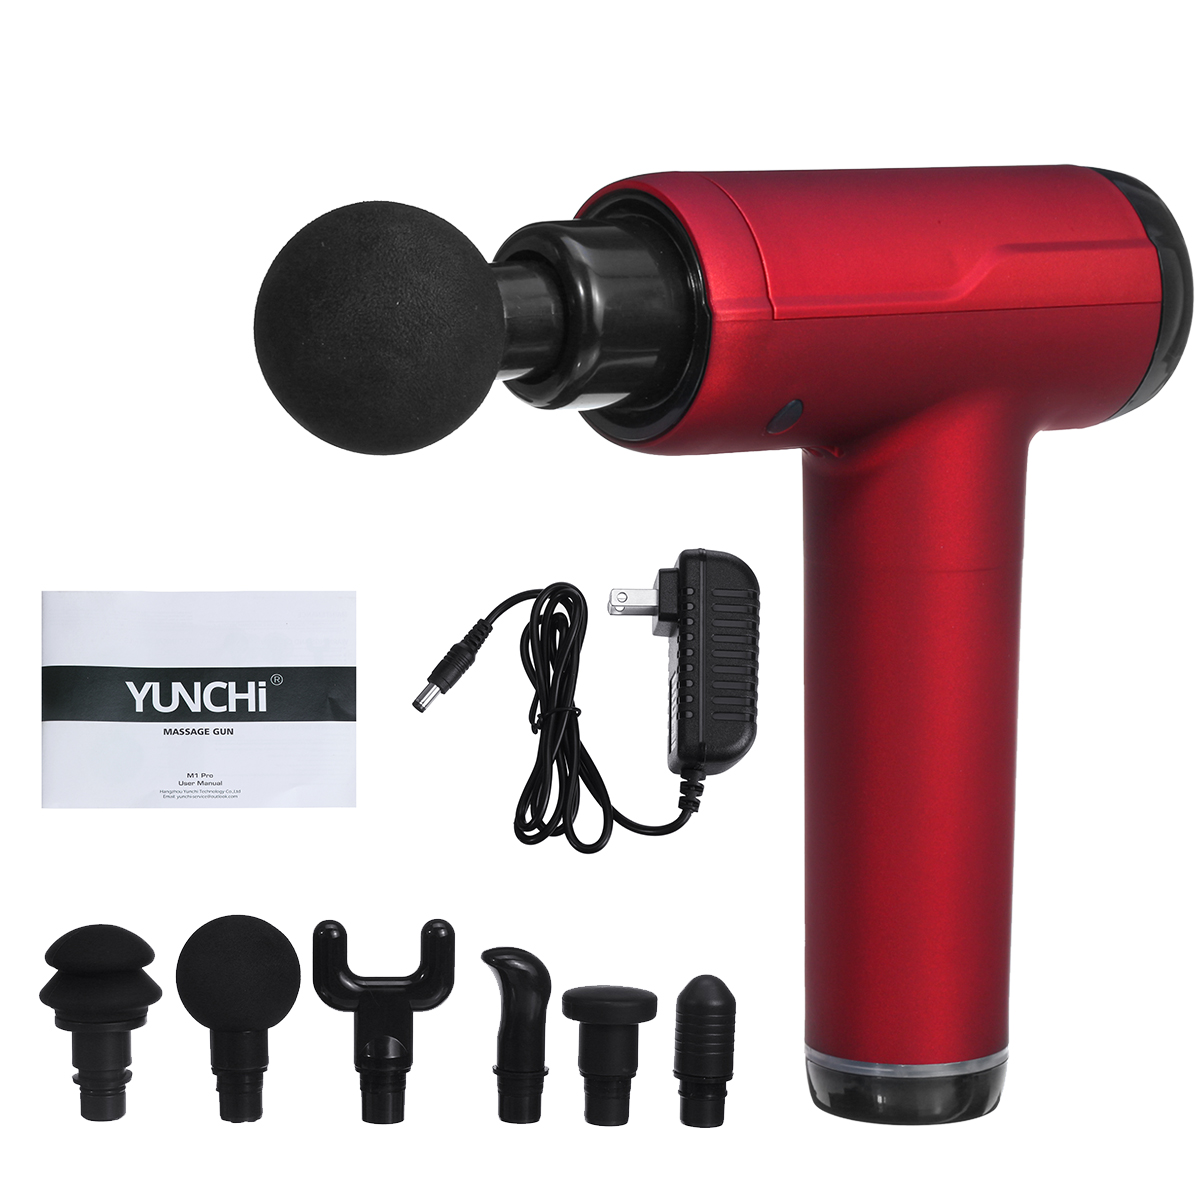 12V-20-Gear-Display-Electric-Percussion-Massager-6-Speeds-2000mAh-Fascia-Muscle-Vibrating-Relaxing-D-1649985-10